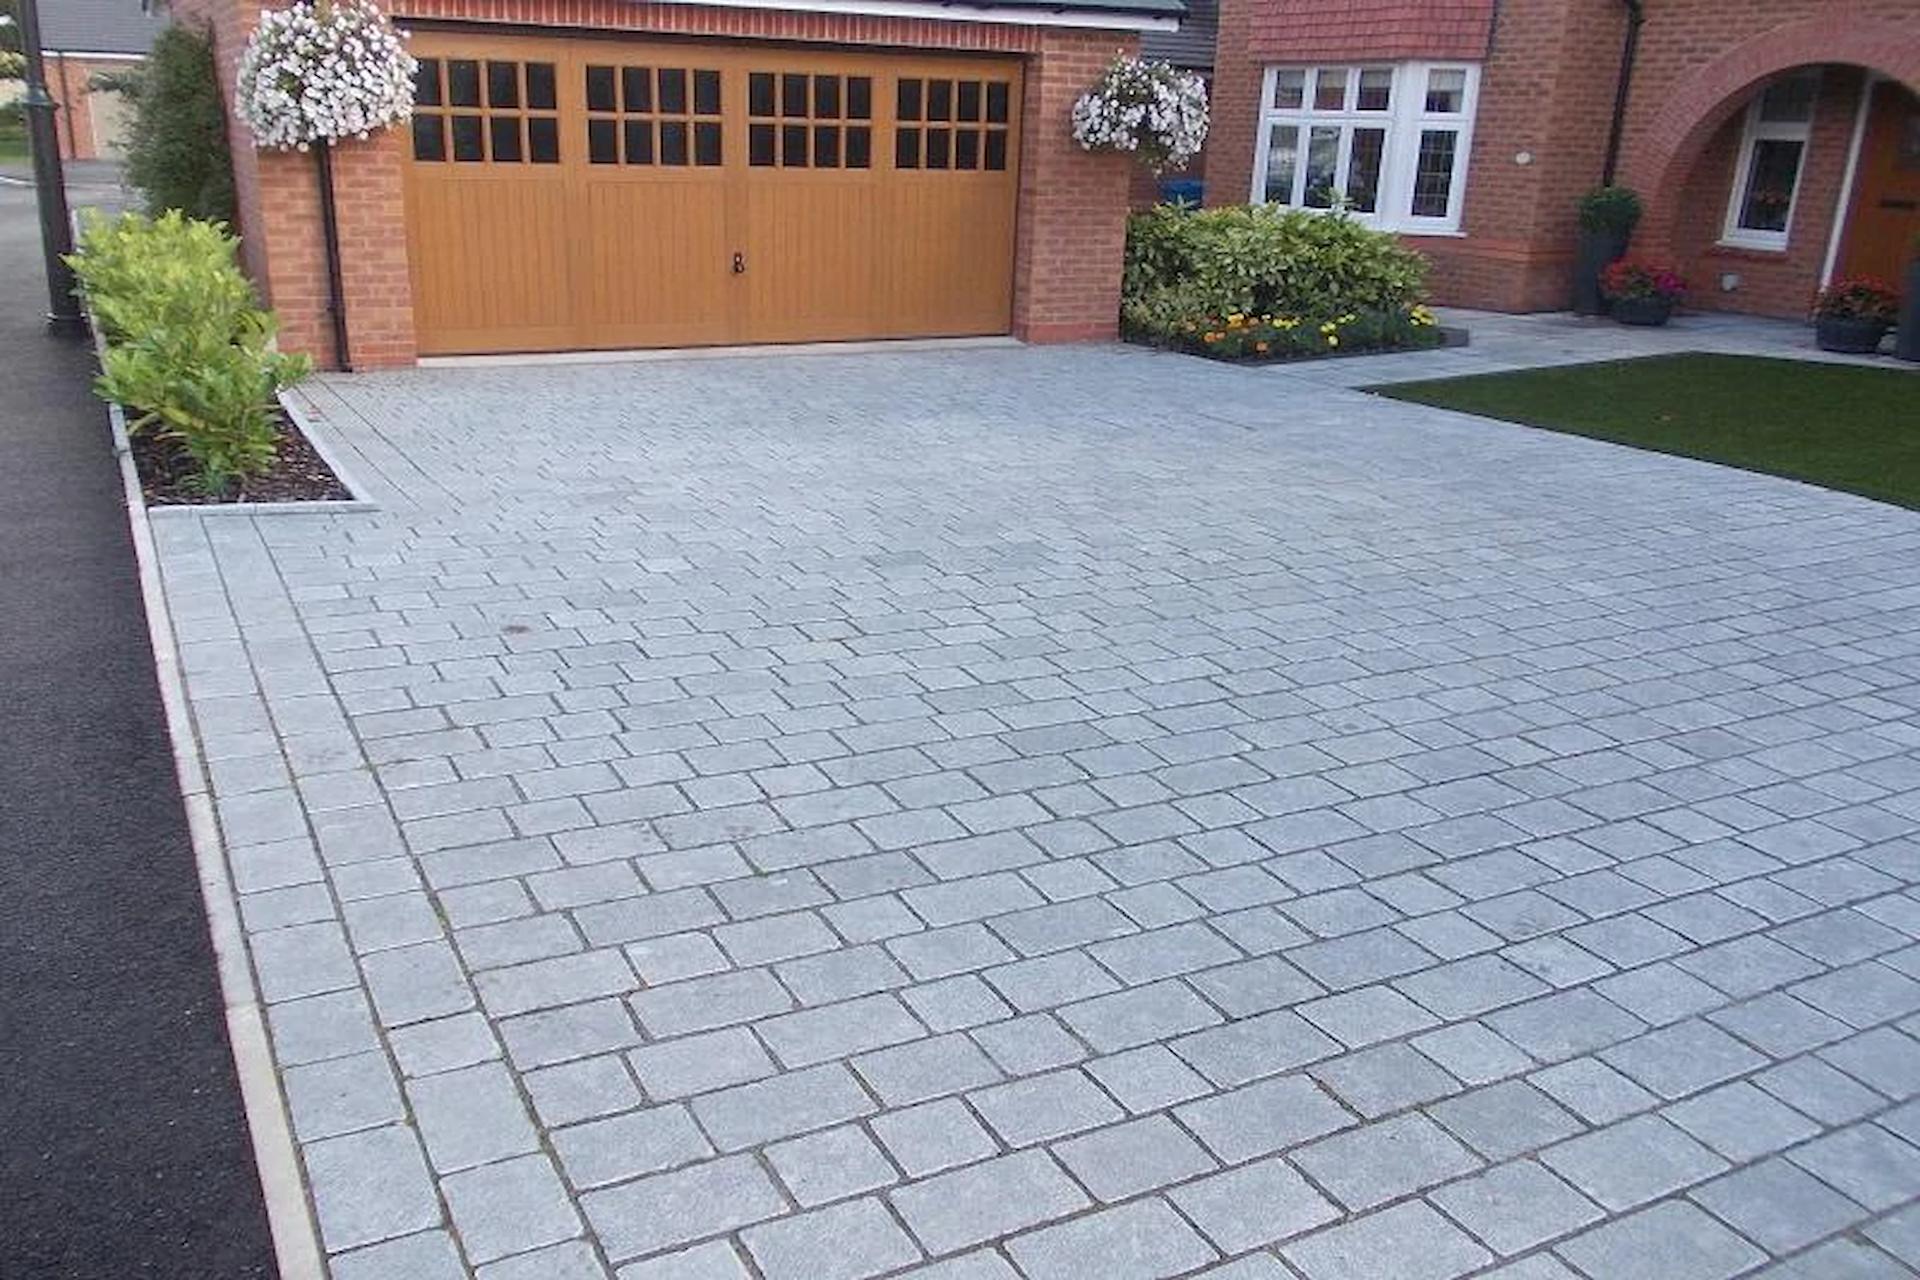 How To Choose The Best Quality And Design Of Driveways?